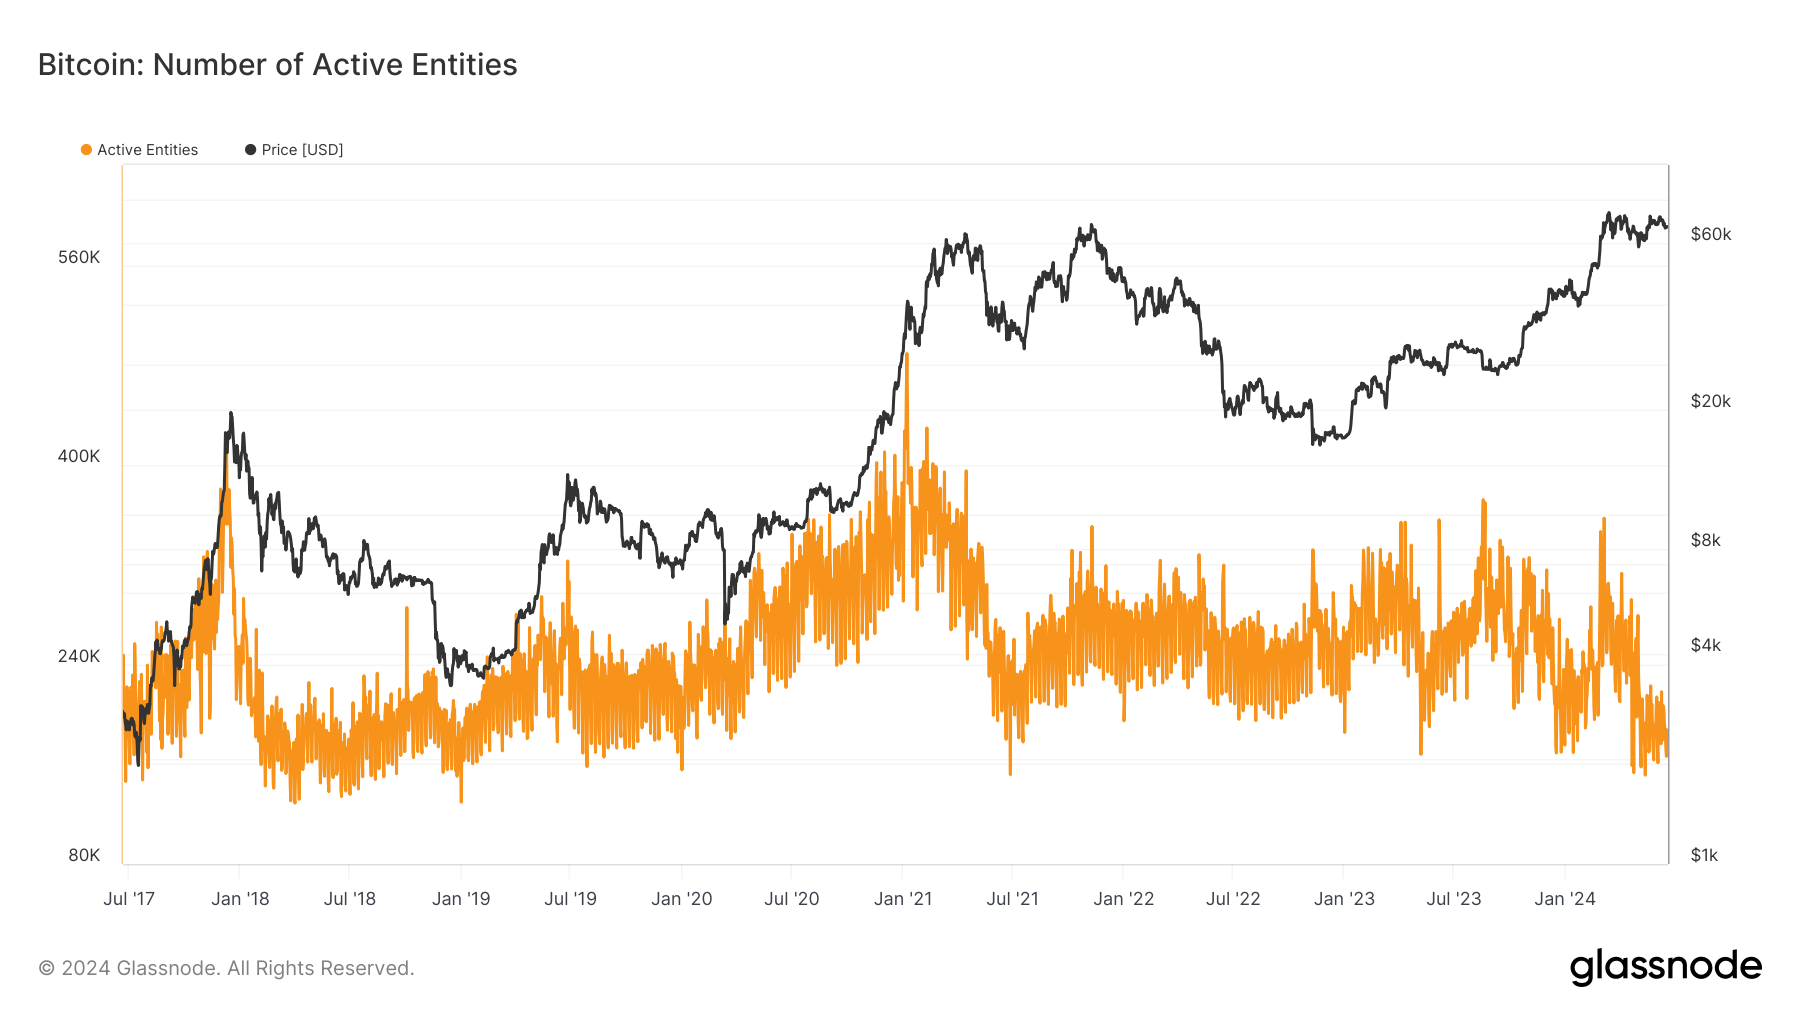 Post-halving congestion slashes Bitcoin active entities to levels unseen in three years